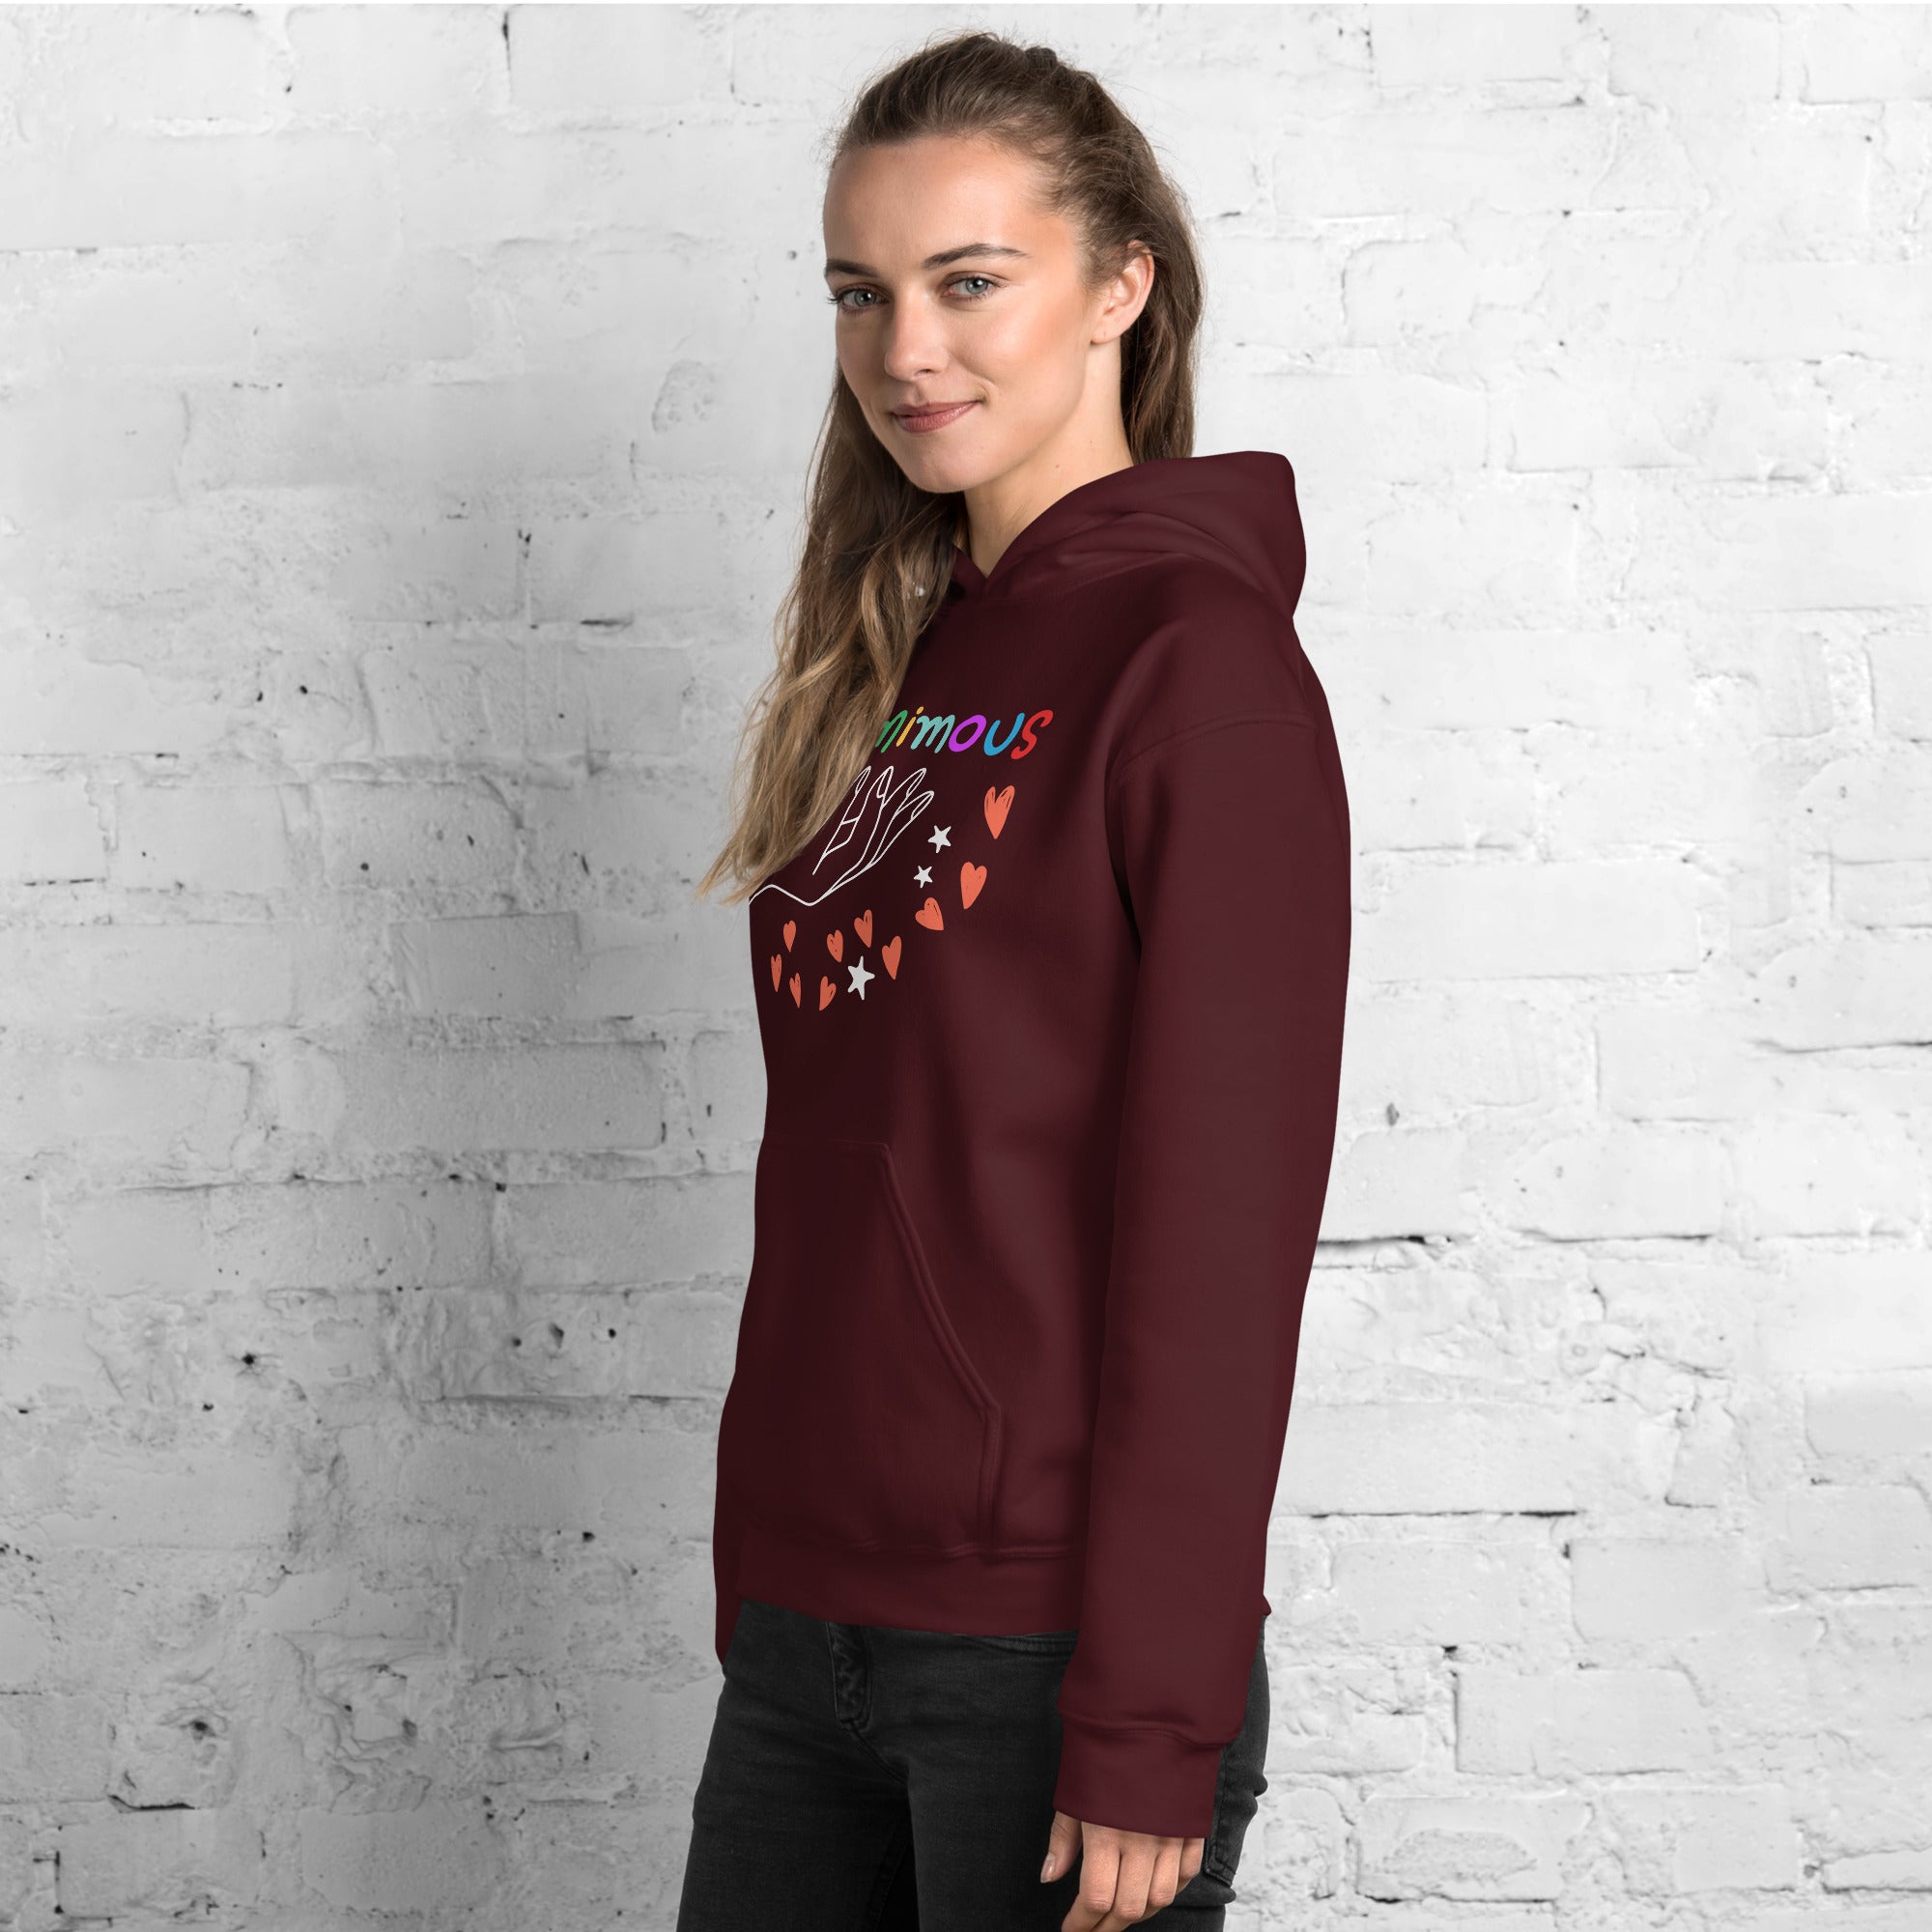 Magnanimous Motivational Hoodie for Women